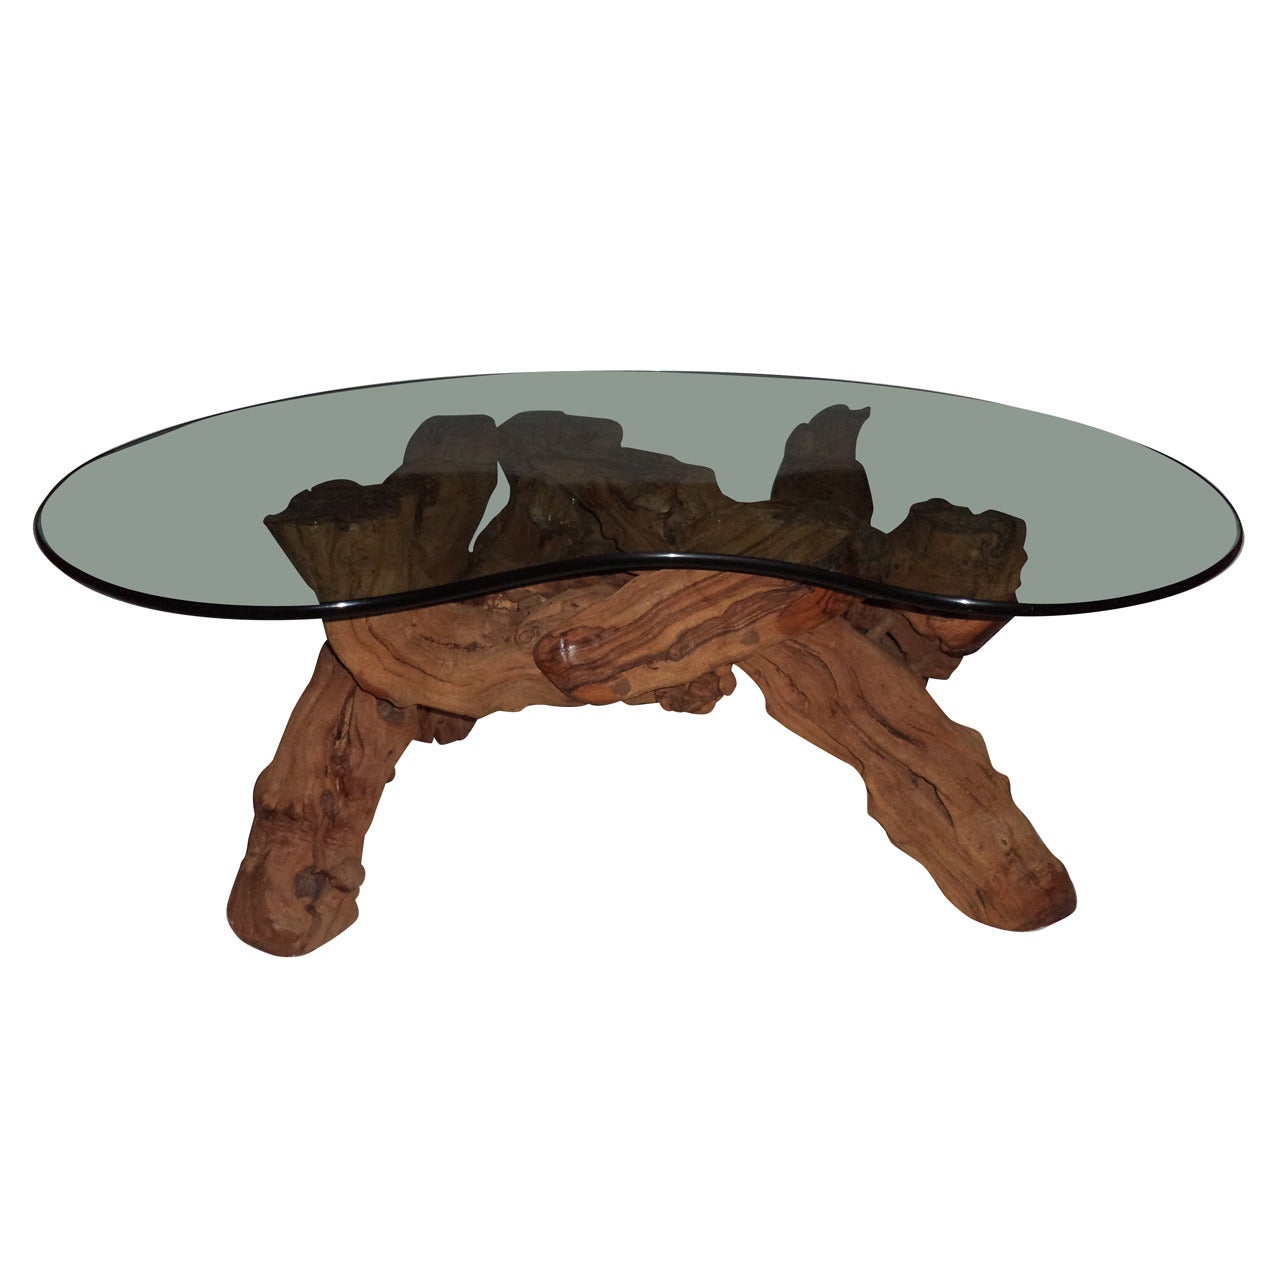 Cypress Root Driftwood Coffee Table with smoked glass top